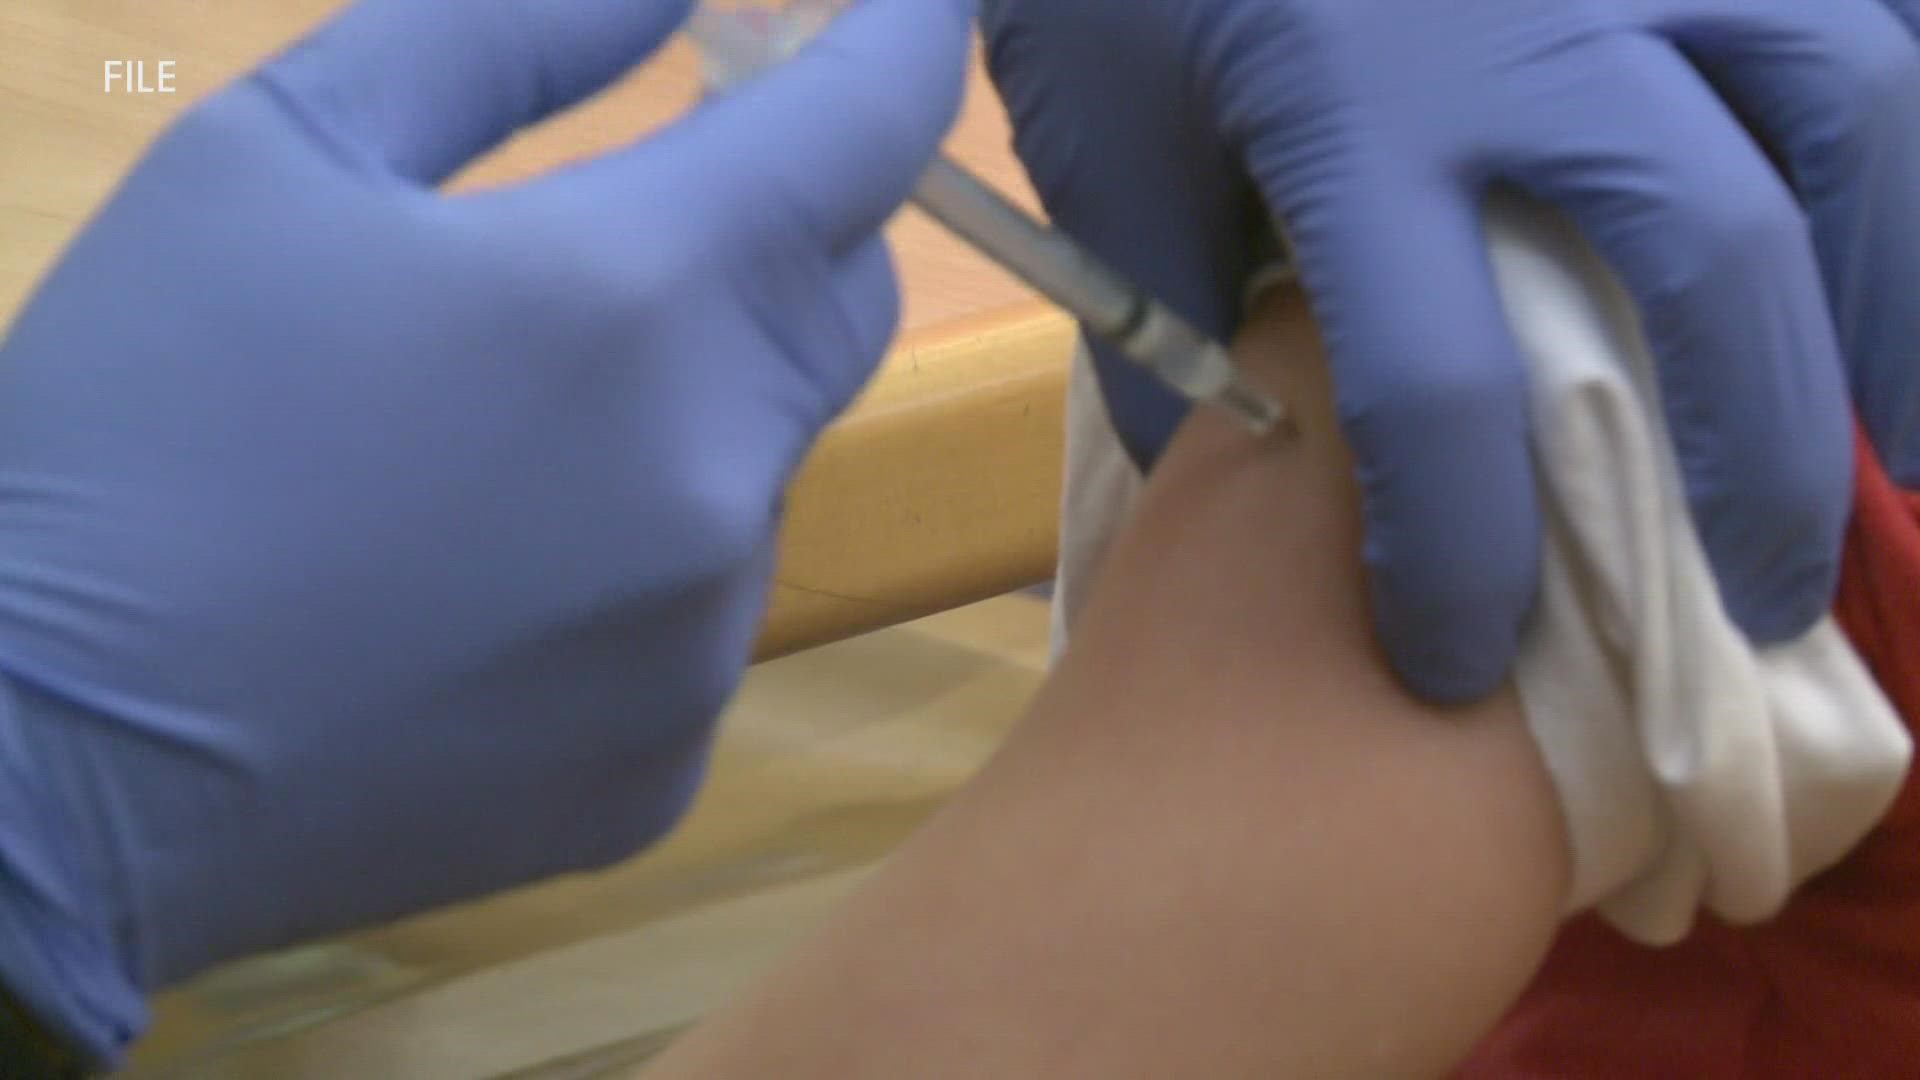 The Kent County Health Department is launching a new campaign to boost vaccination rates among children.